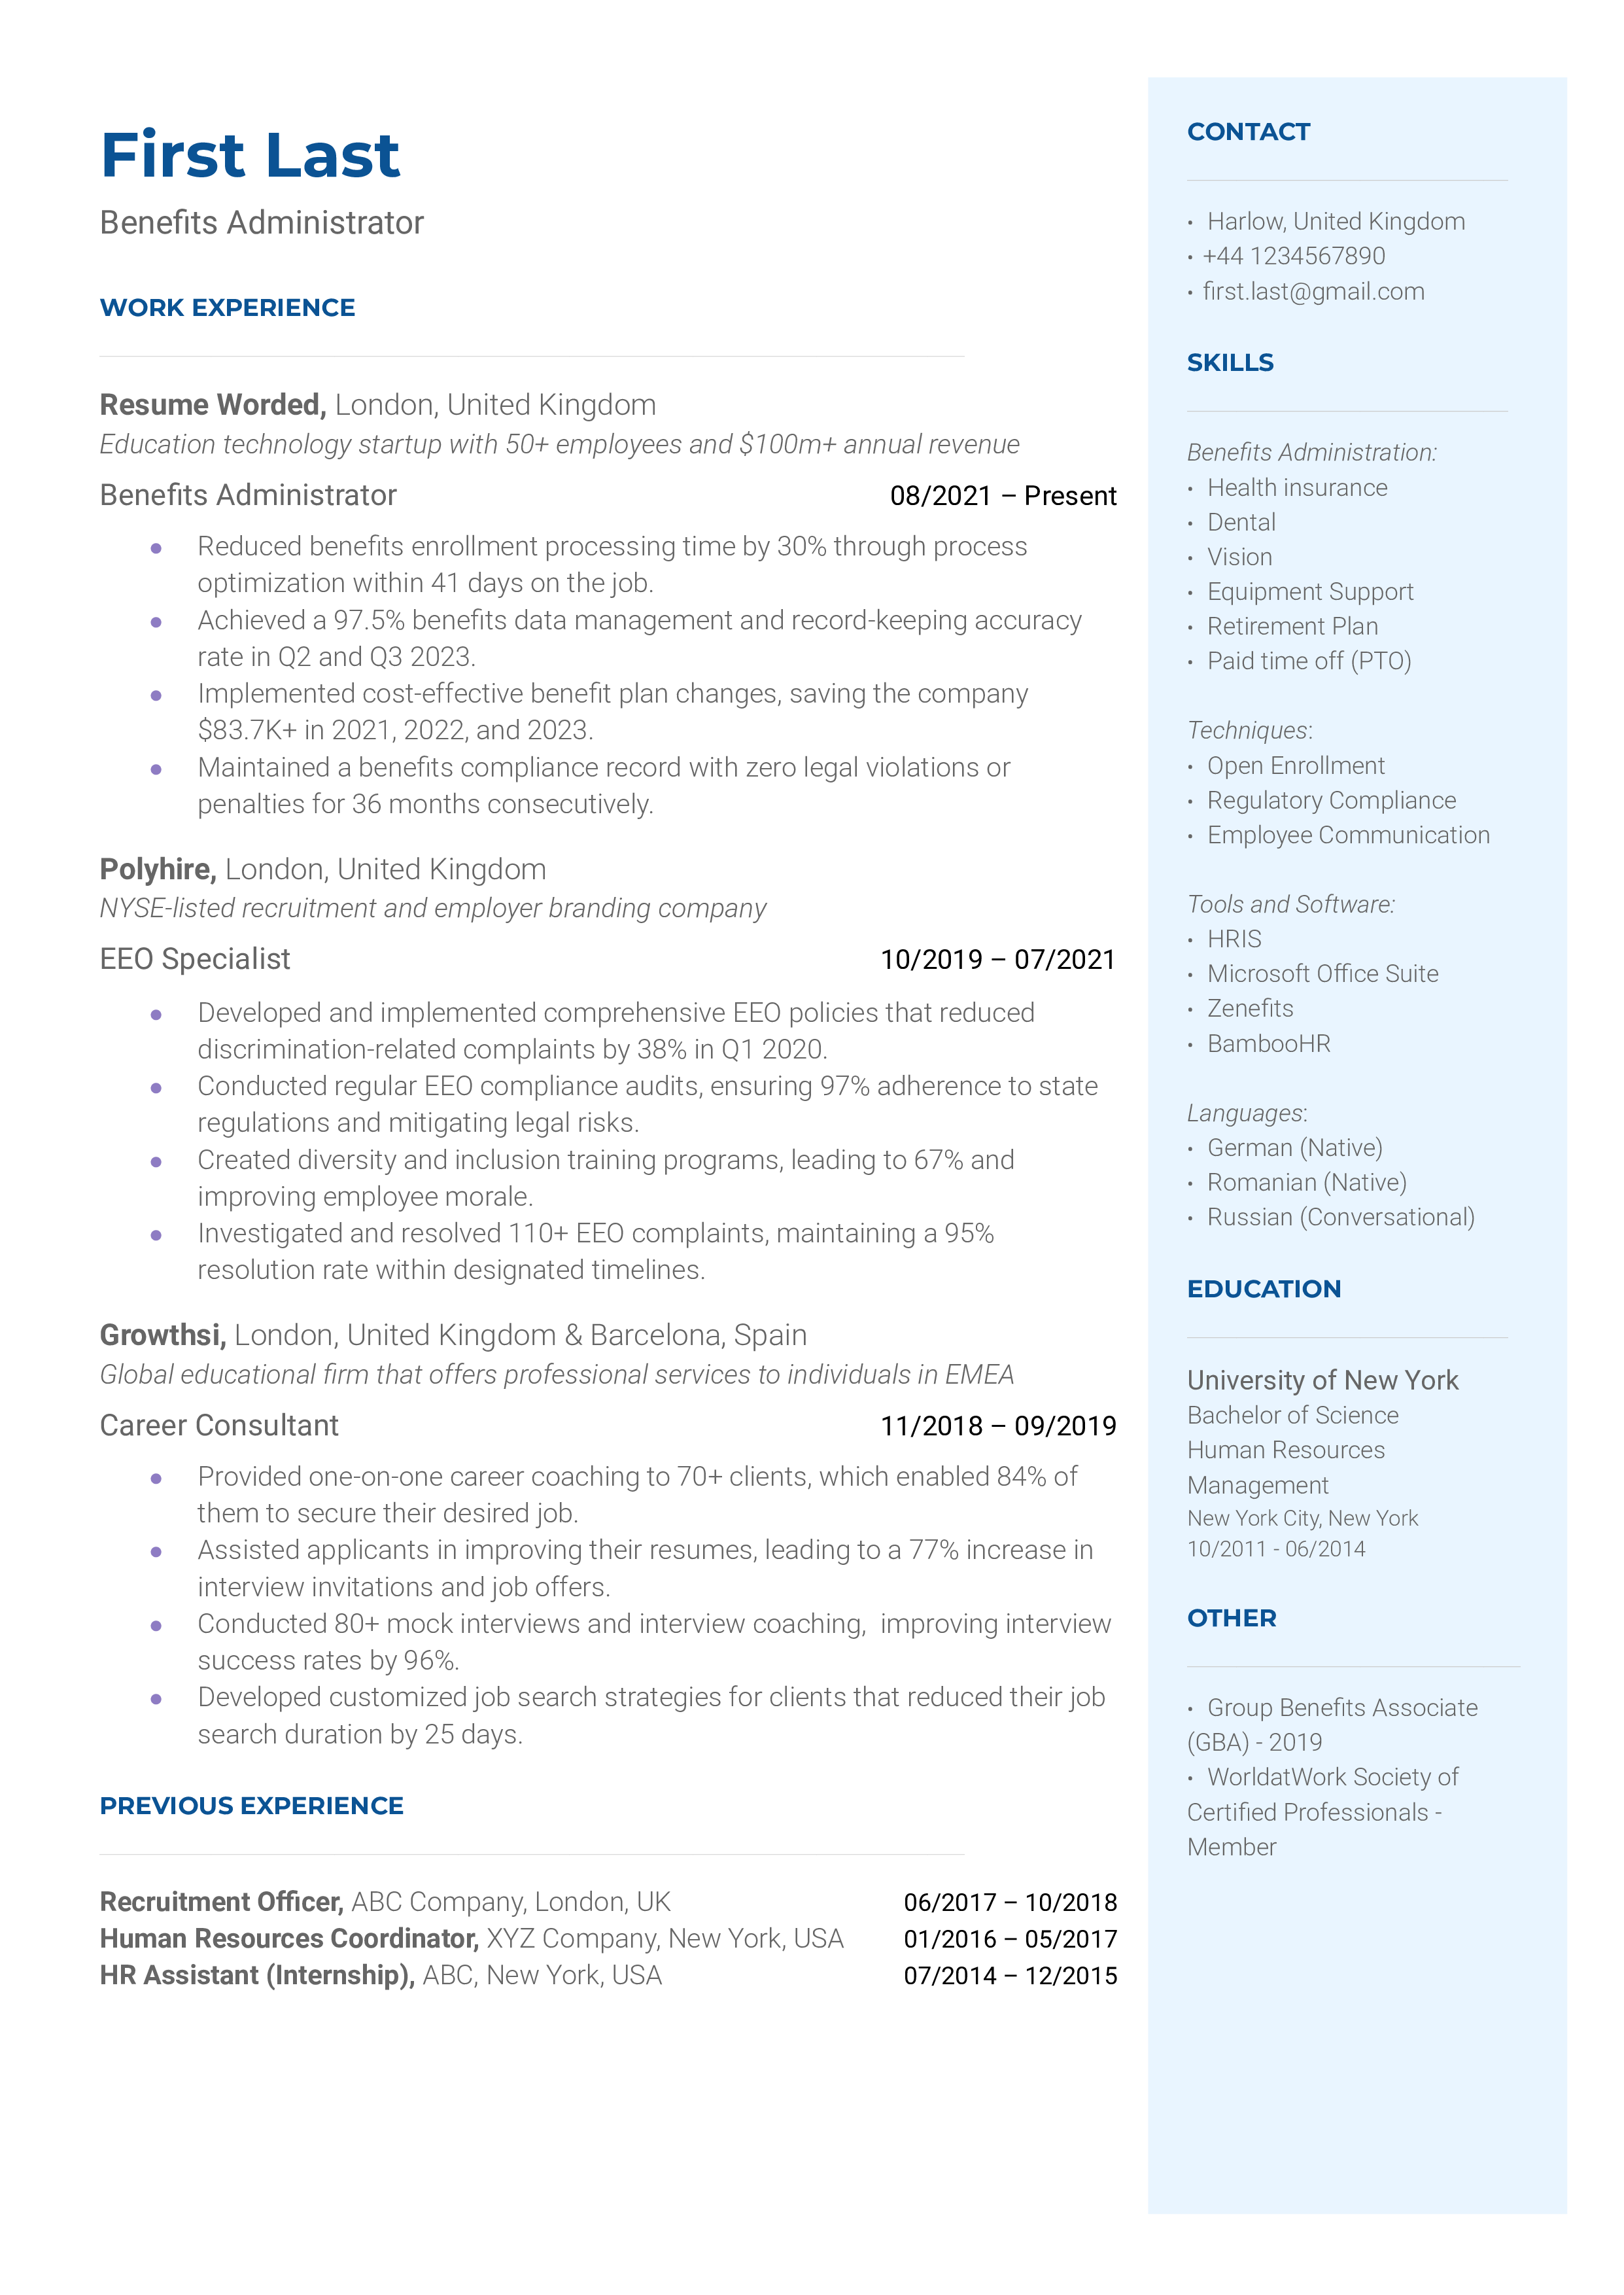 A sample resume for a Benefits Administrator role.